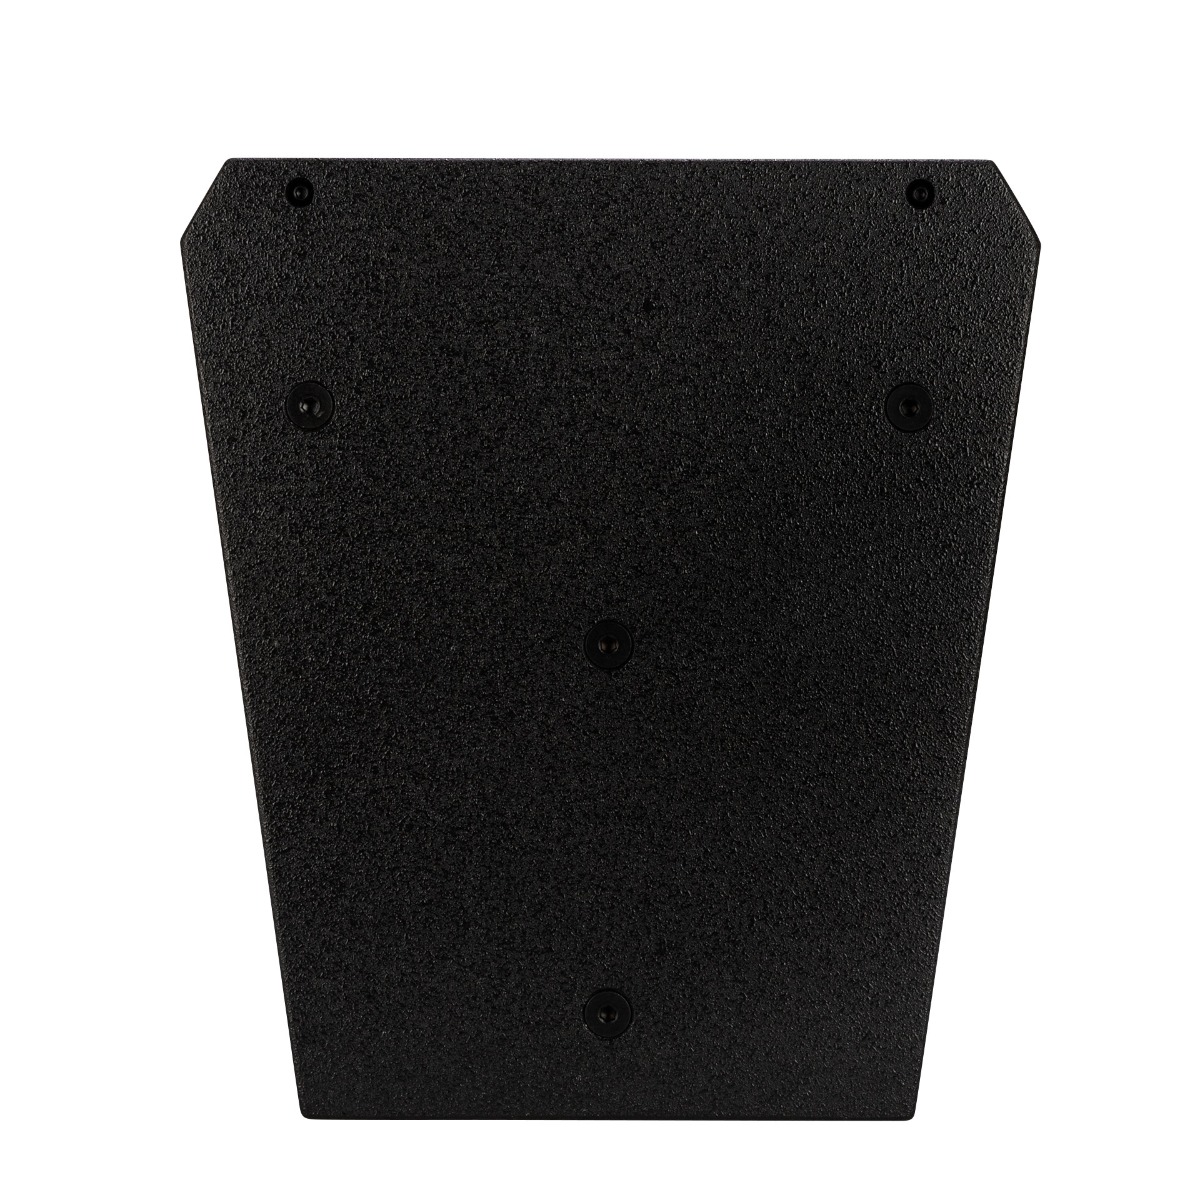 RCF COMPACT M 12 - 12" 2-Way Passive Installation Speaker